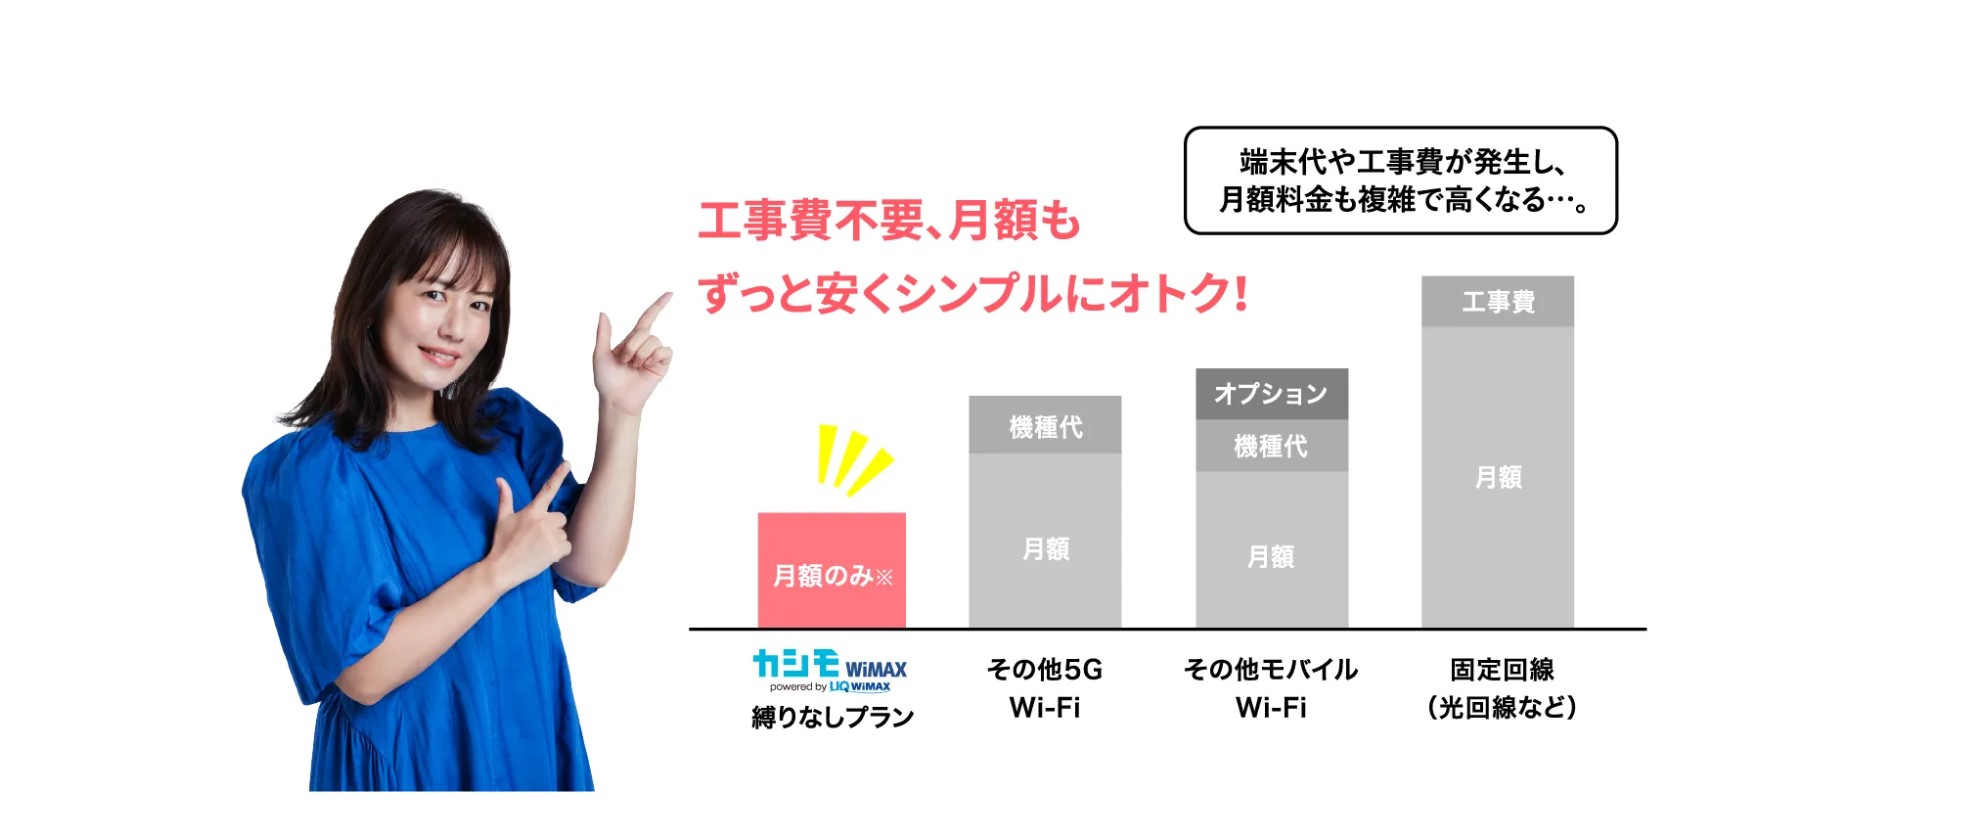 WIMAX2